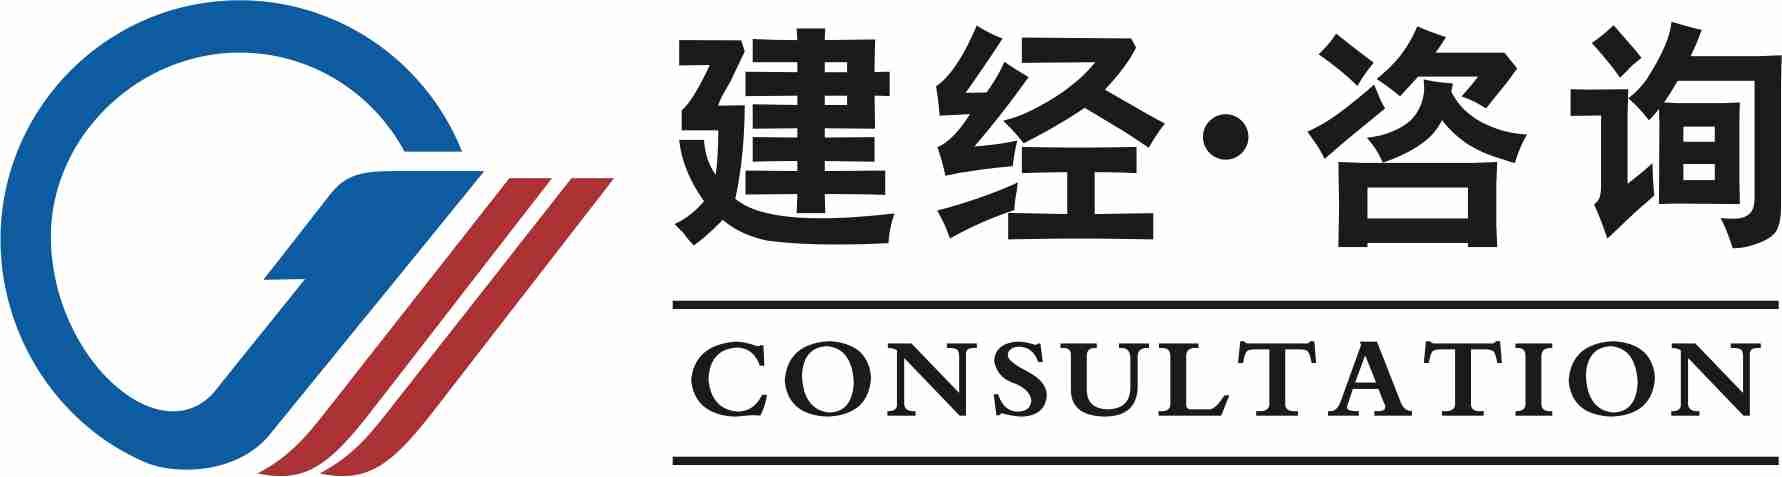 JIANJING INVESTMENT&CONSULTATION CO.,LTD.